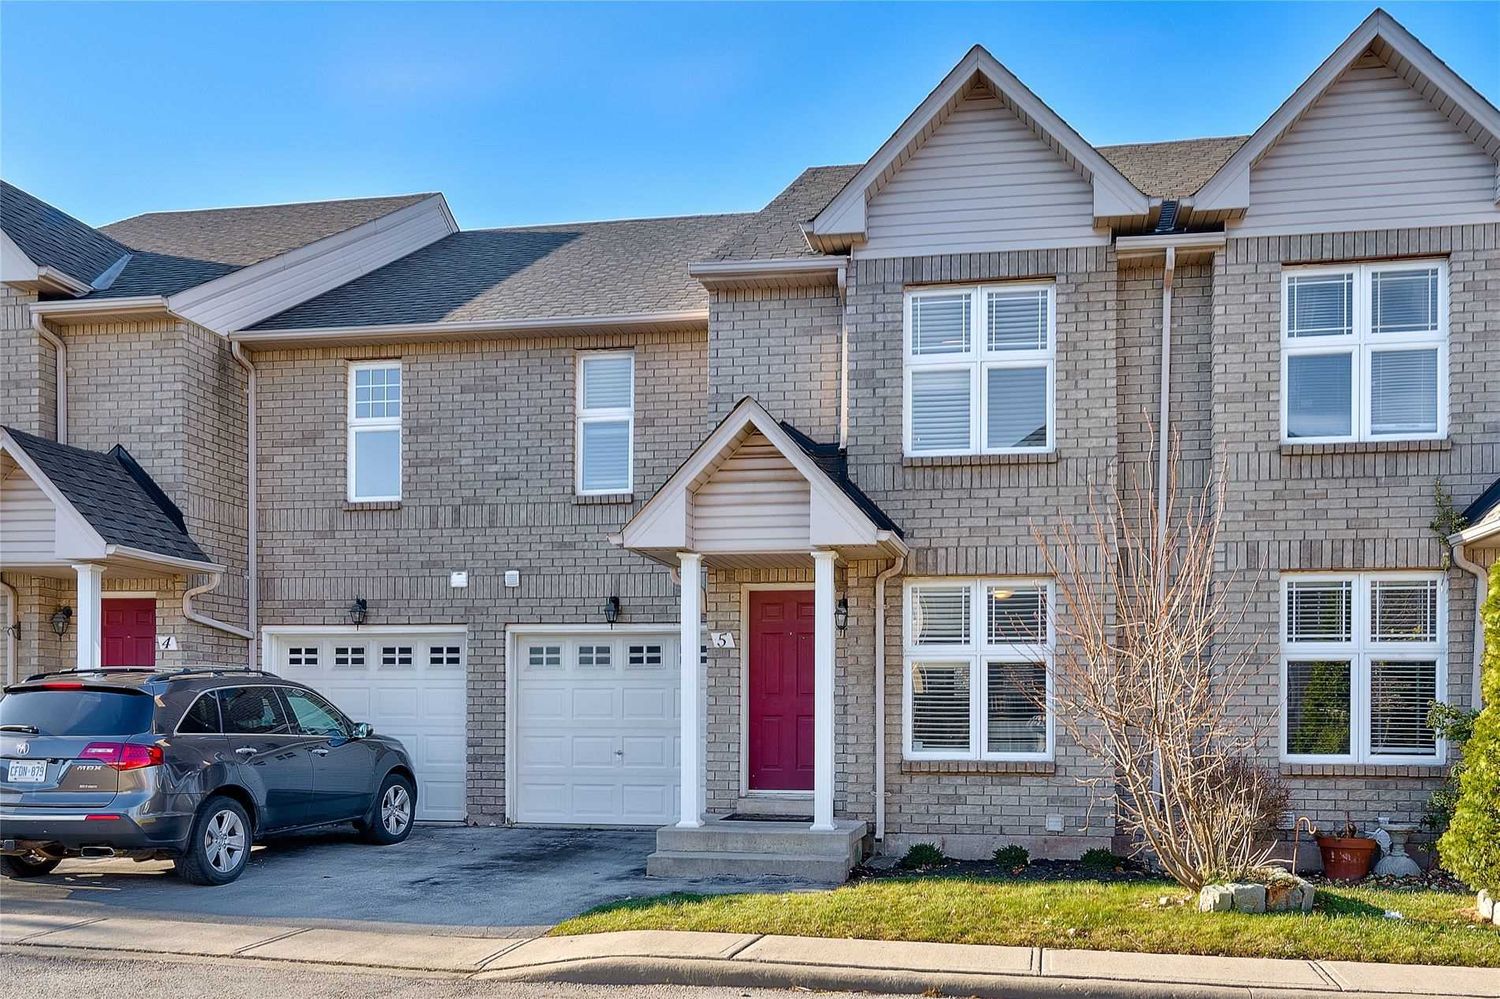 2189 Postmaster Drive. 2189 Postmaster Drive Townhomes is located in  Oakville, Toronto - image #2 of 2